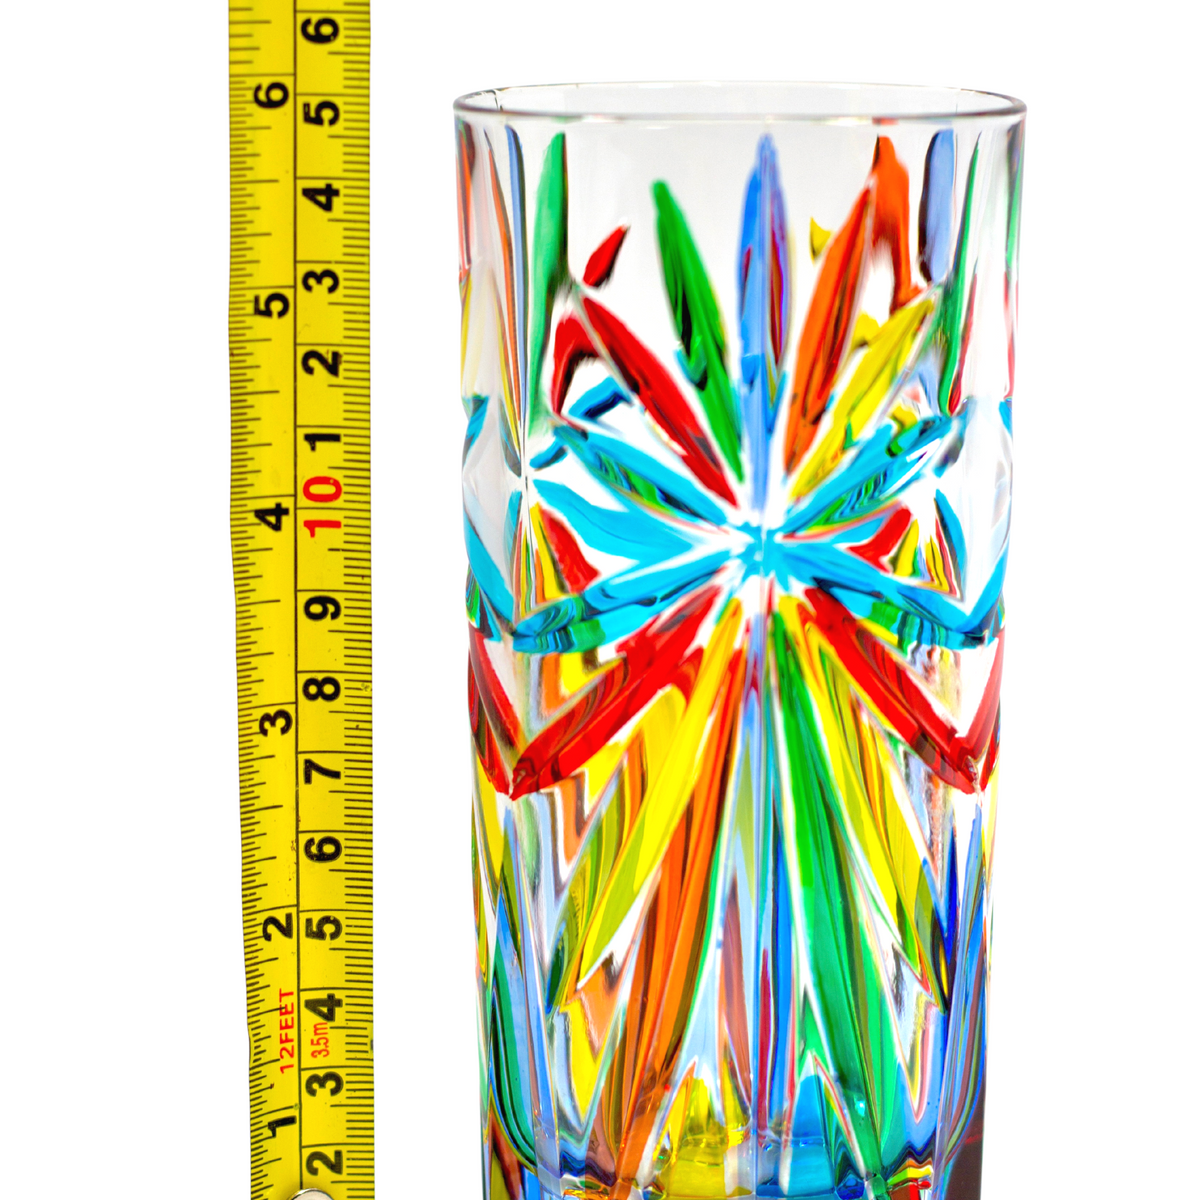 Starburst Tall Drink Glasses, Set of 2, Made in Italy - My Italian Decor